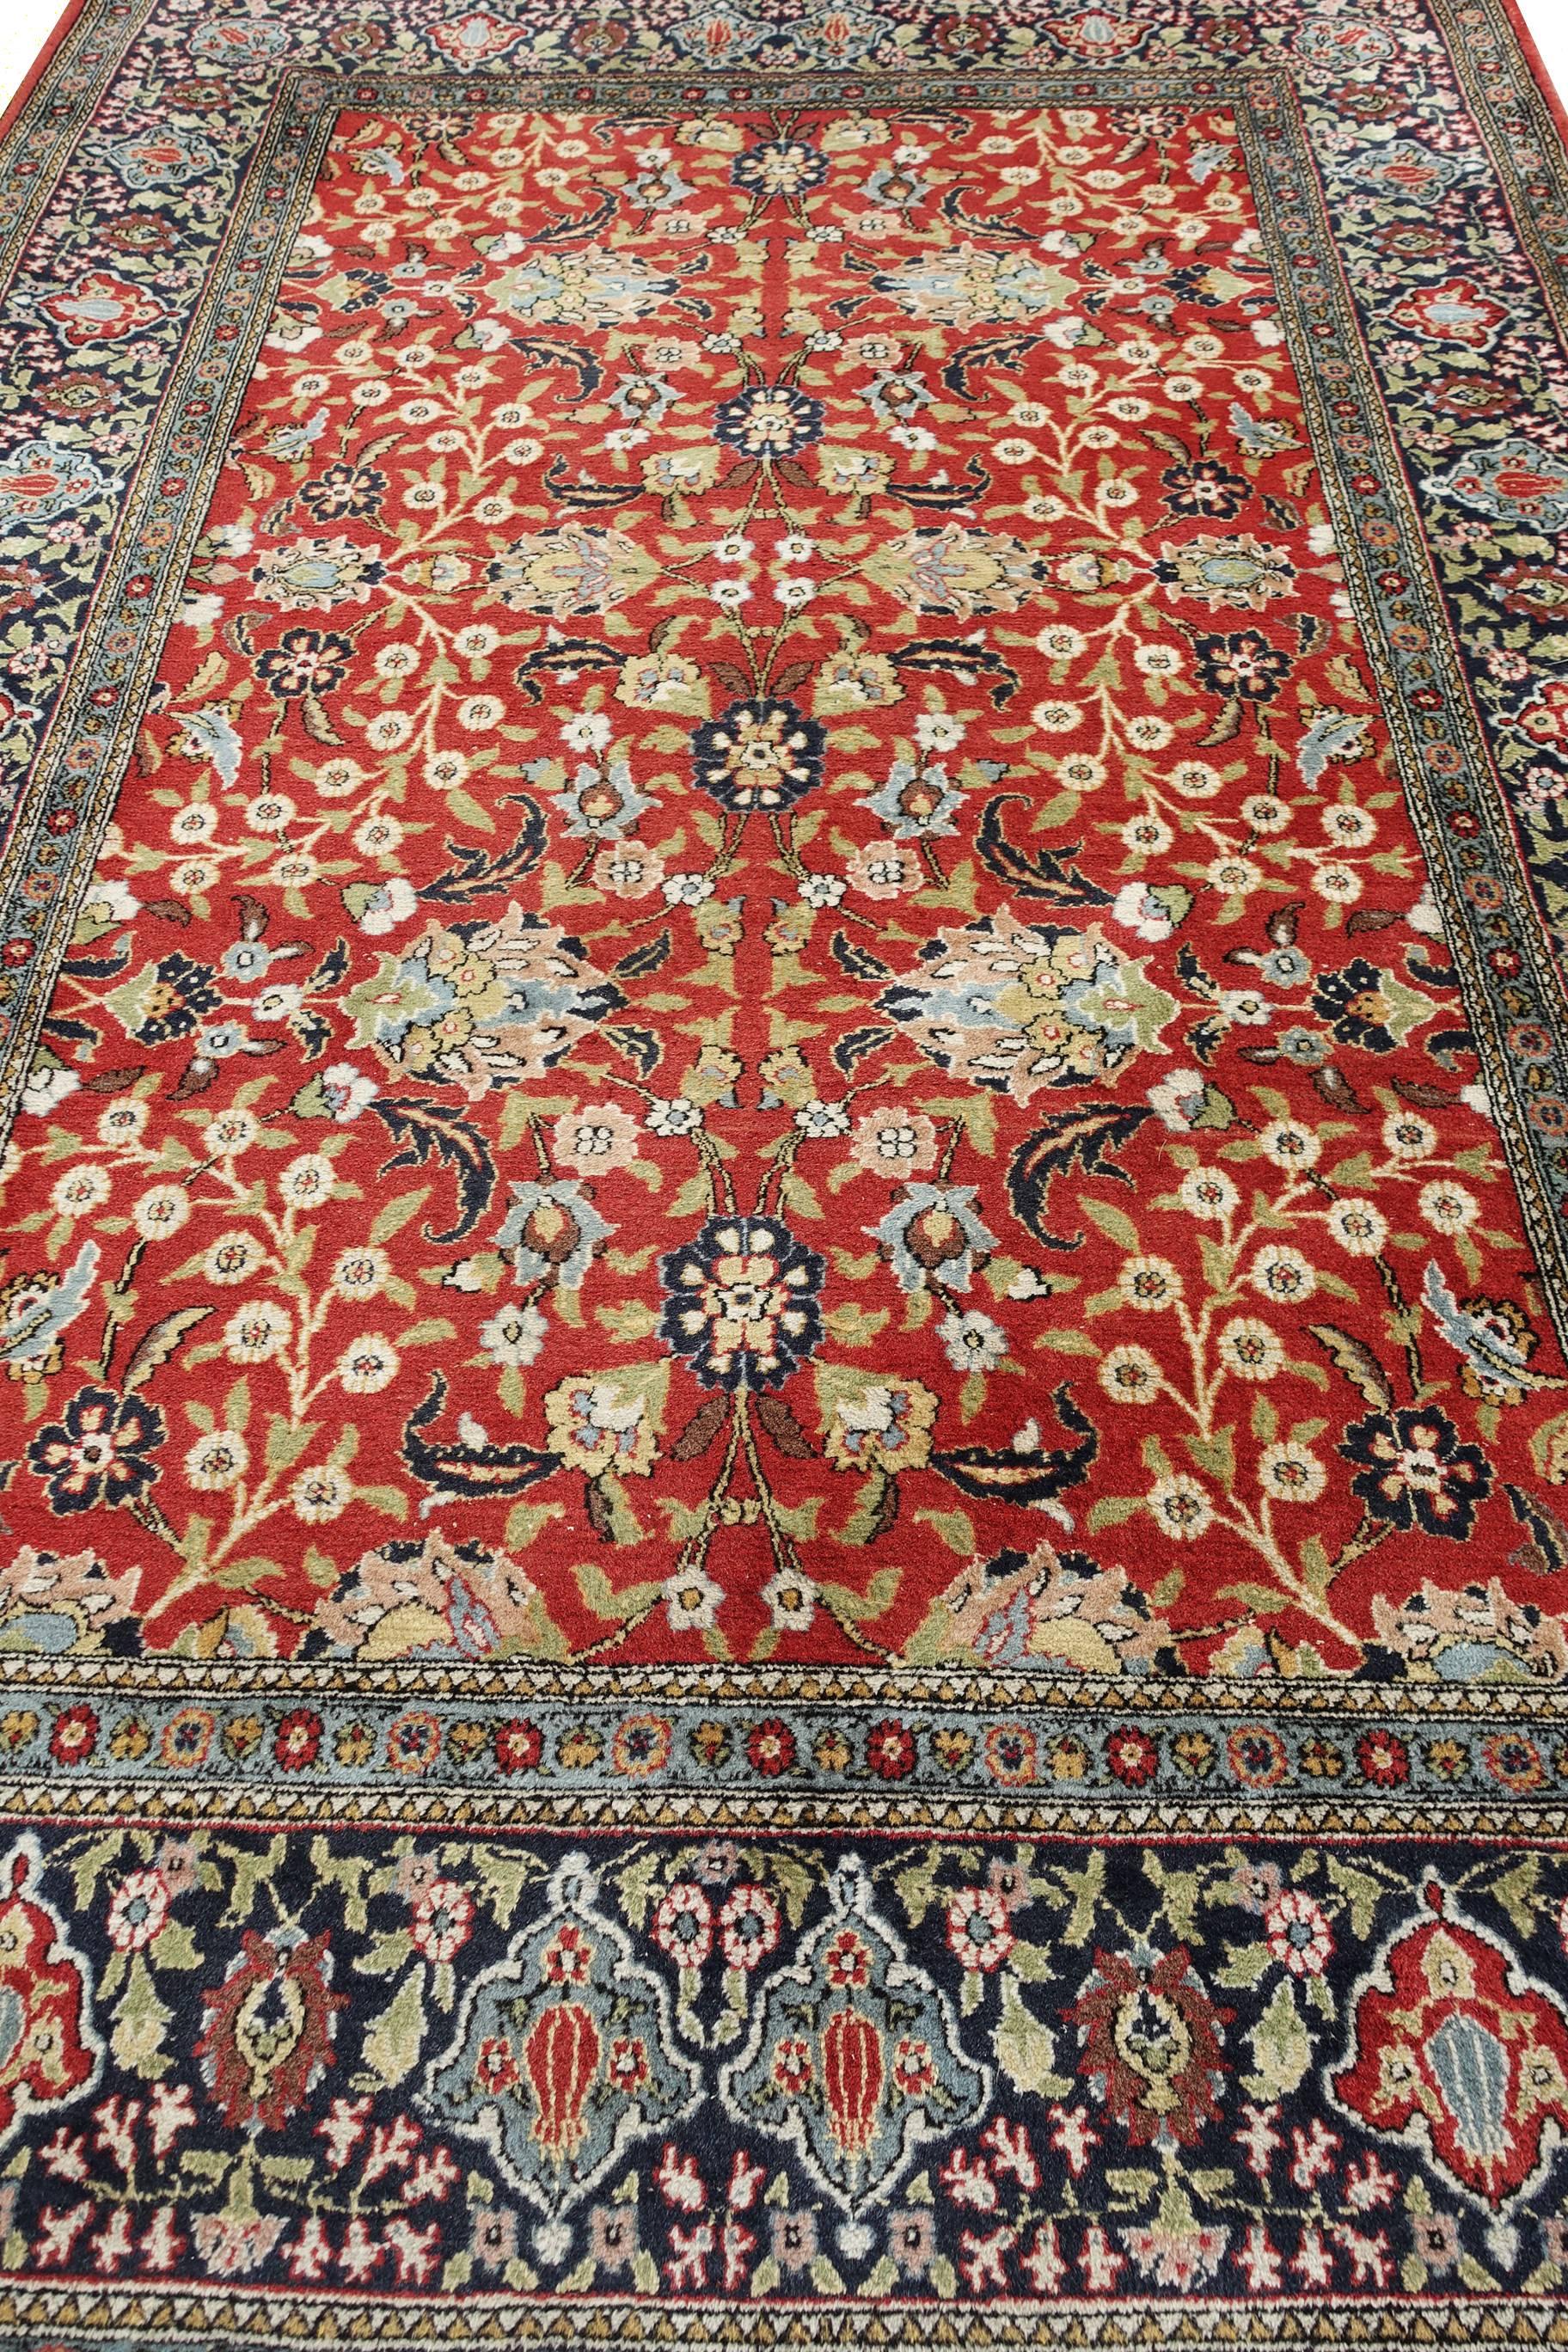 Vintage Wool 'Flowers of the Seven Hills' Turkish Hereke Carpet

This is a rather unusual Hereke carpet in the ancient Ottoman design as its beautiful floral pattern is set against a light maroon field as opposed to the traditional blue one. Coveted